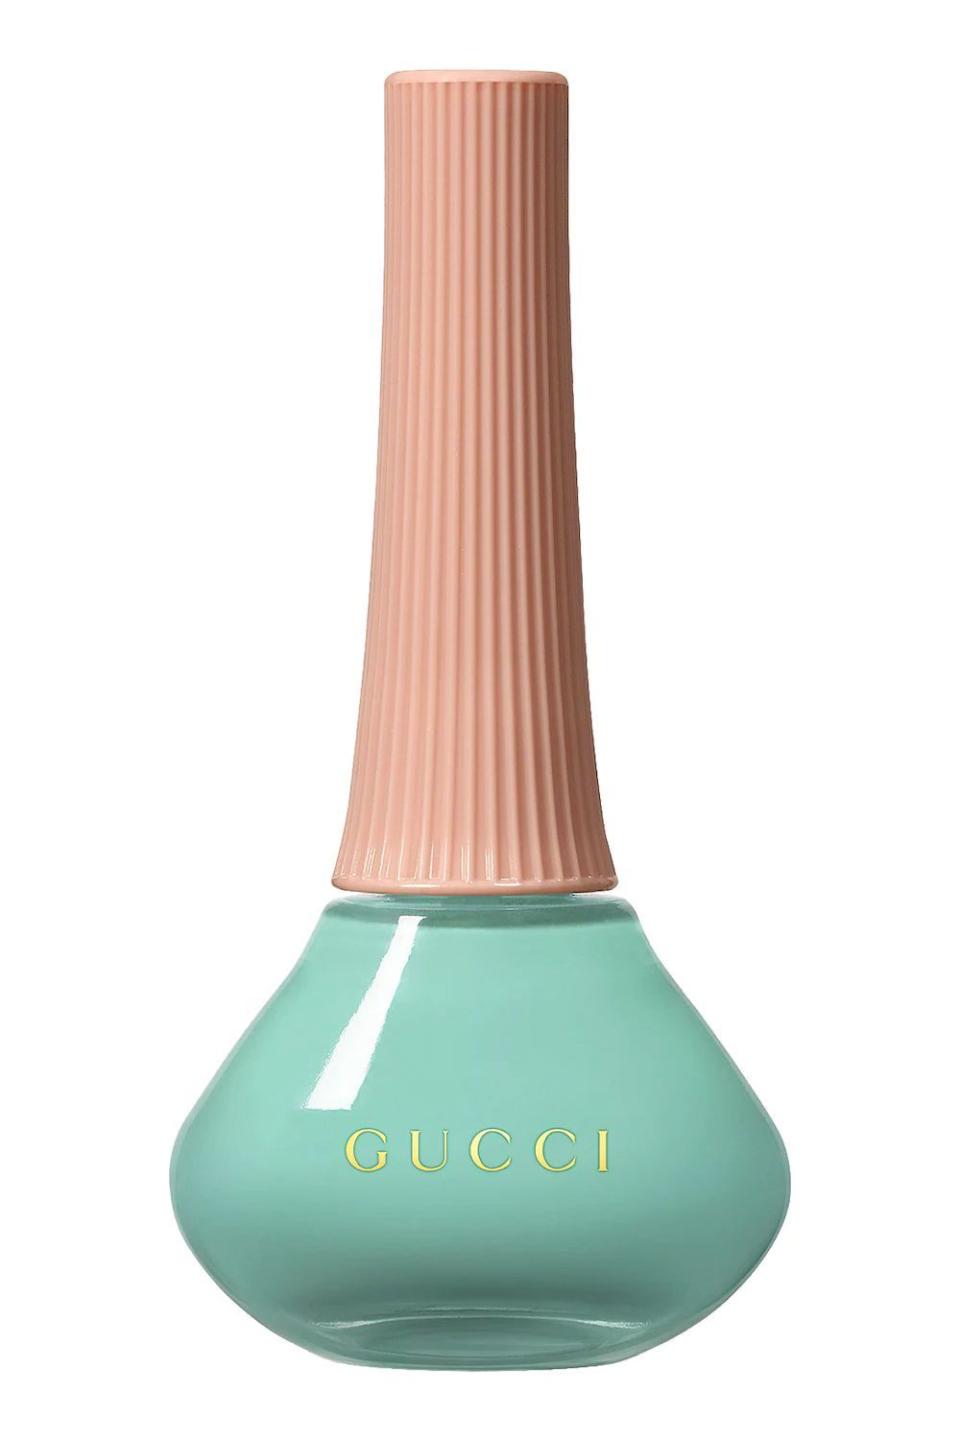 2) Gucci Vernis À Ongles Nail Polish in Dorothy Turquoise